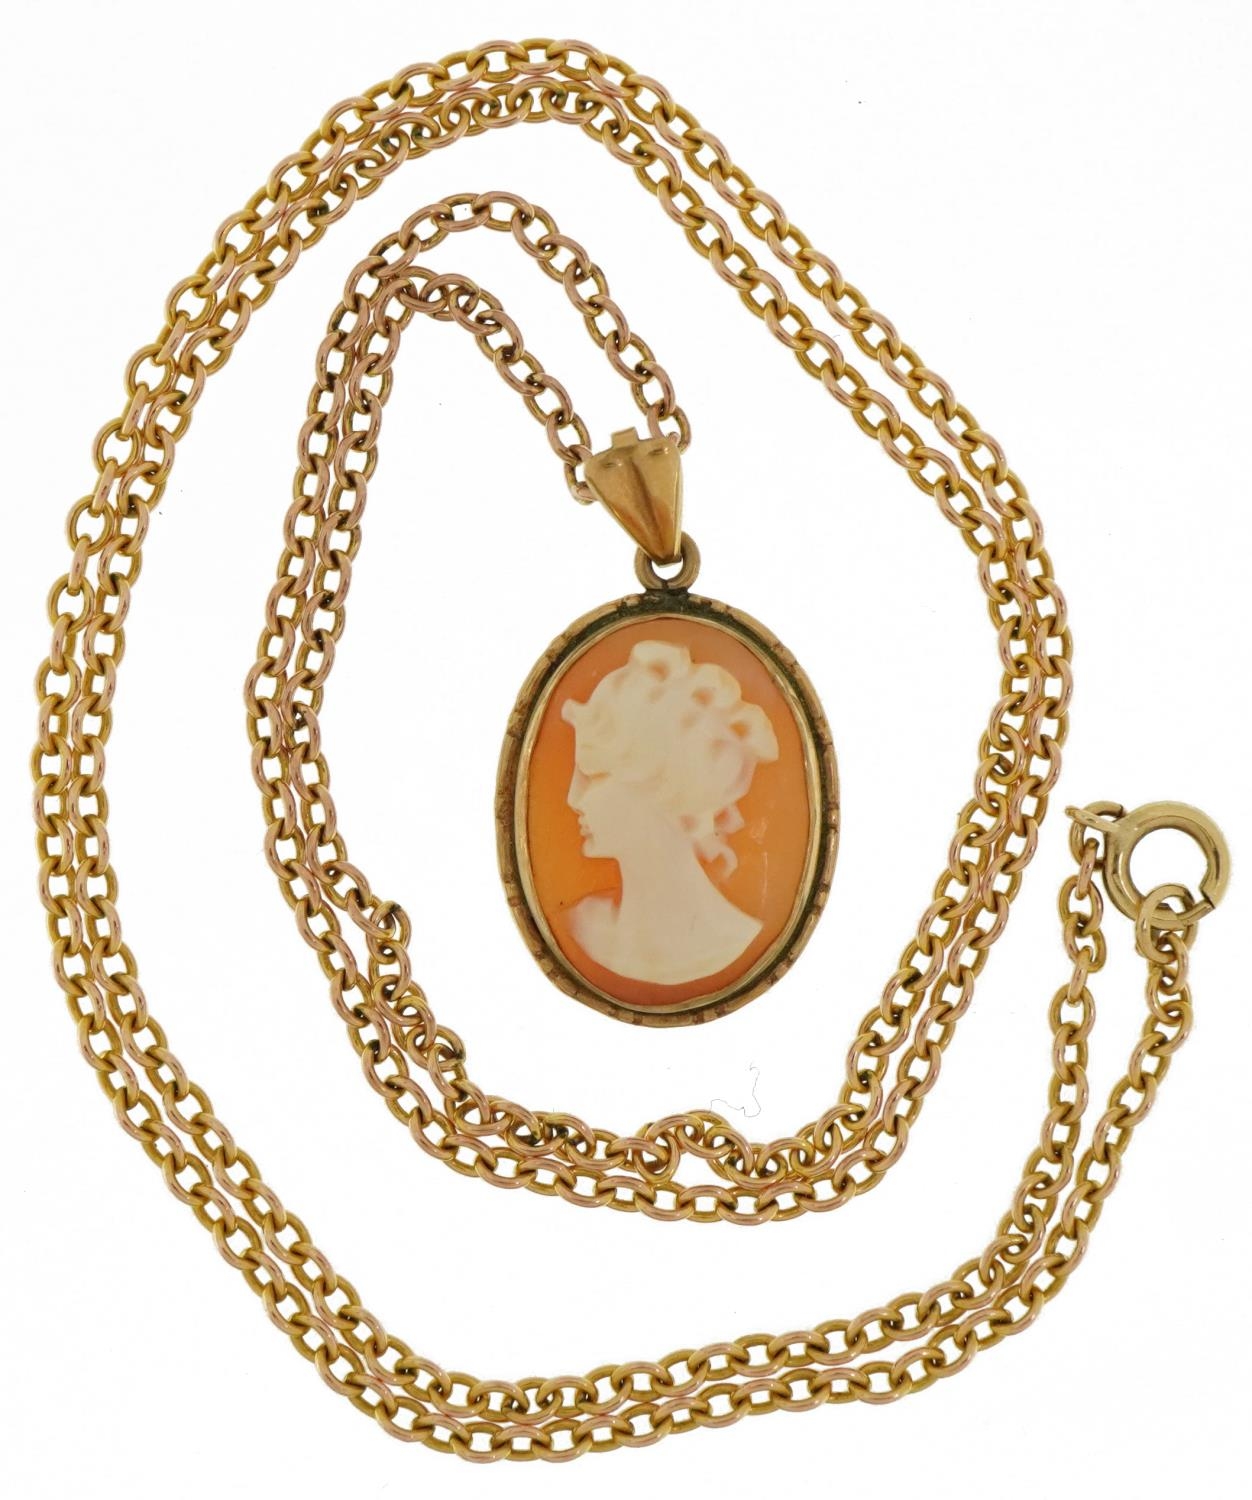 9ct gold mounted cameo maiden head pendant on 9ct gold Belcher link necklace, 3.0cm high and 60cm in - Image 2 of 4